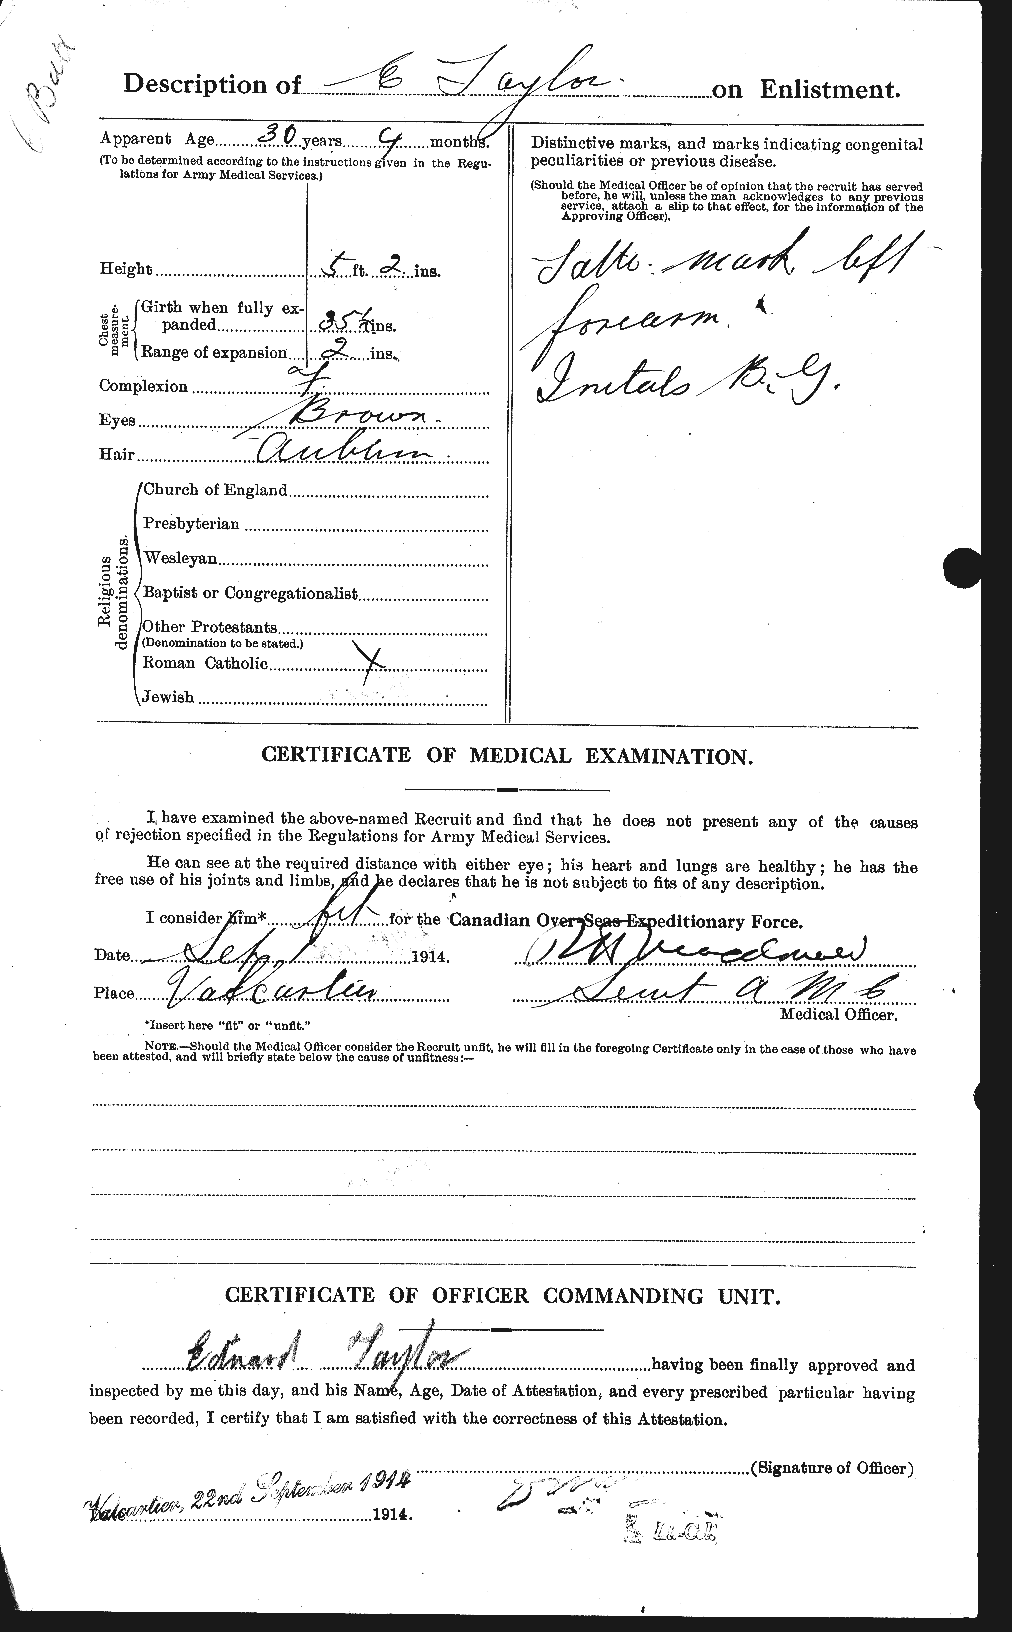 Personnel Records of the First World War - CEF 627295b